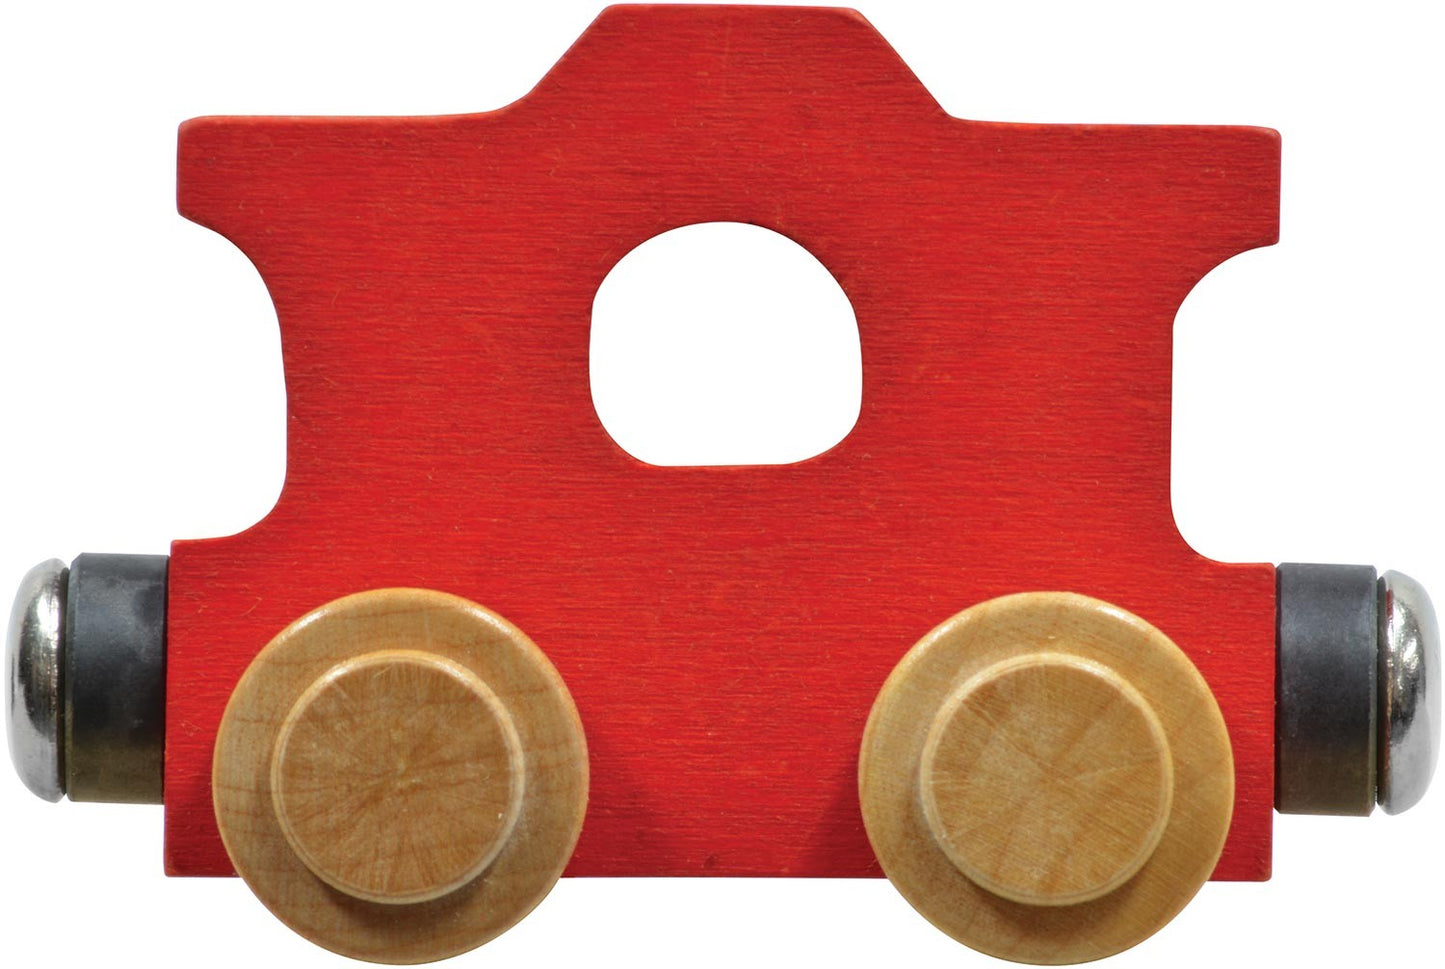 NameTrains Bright Red Caboose